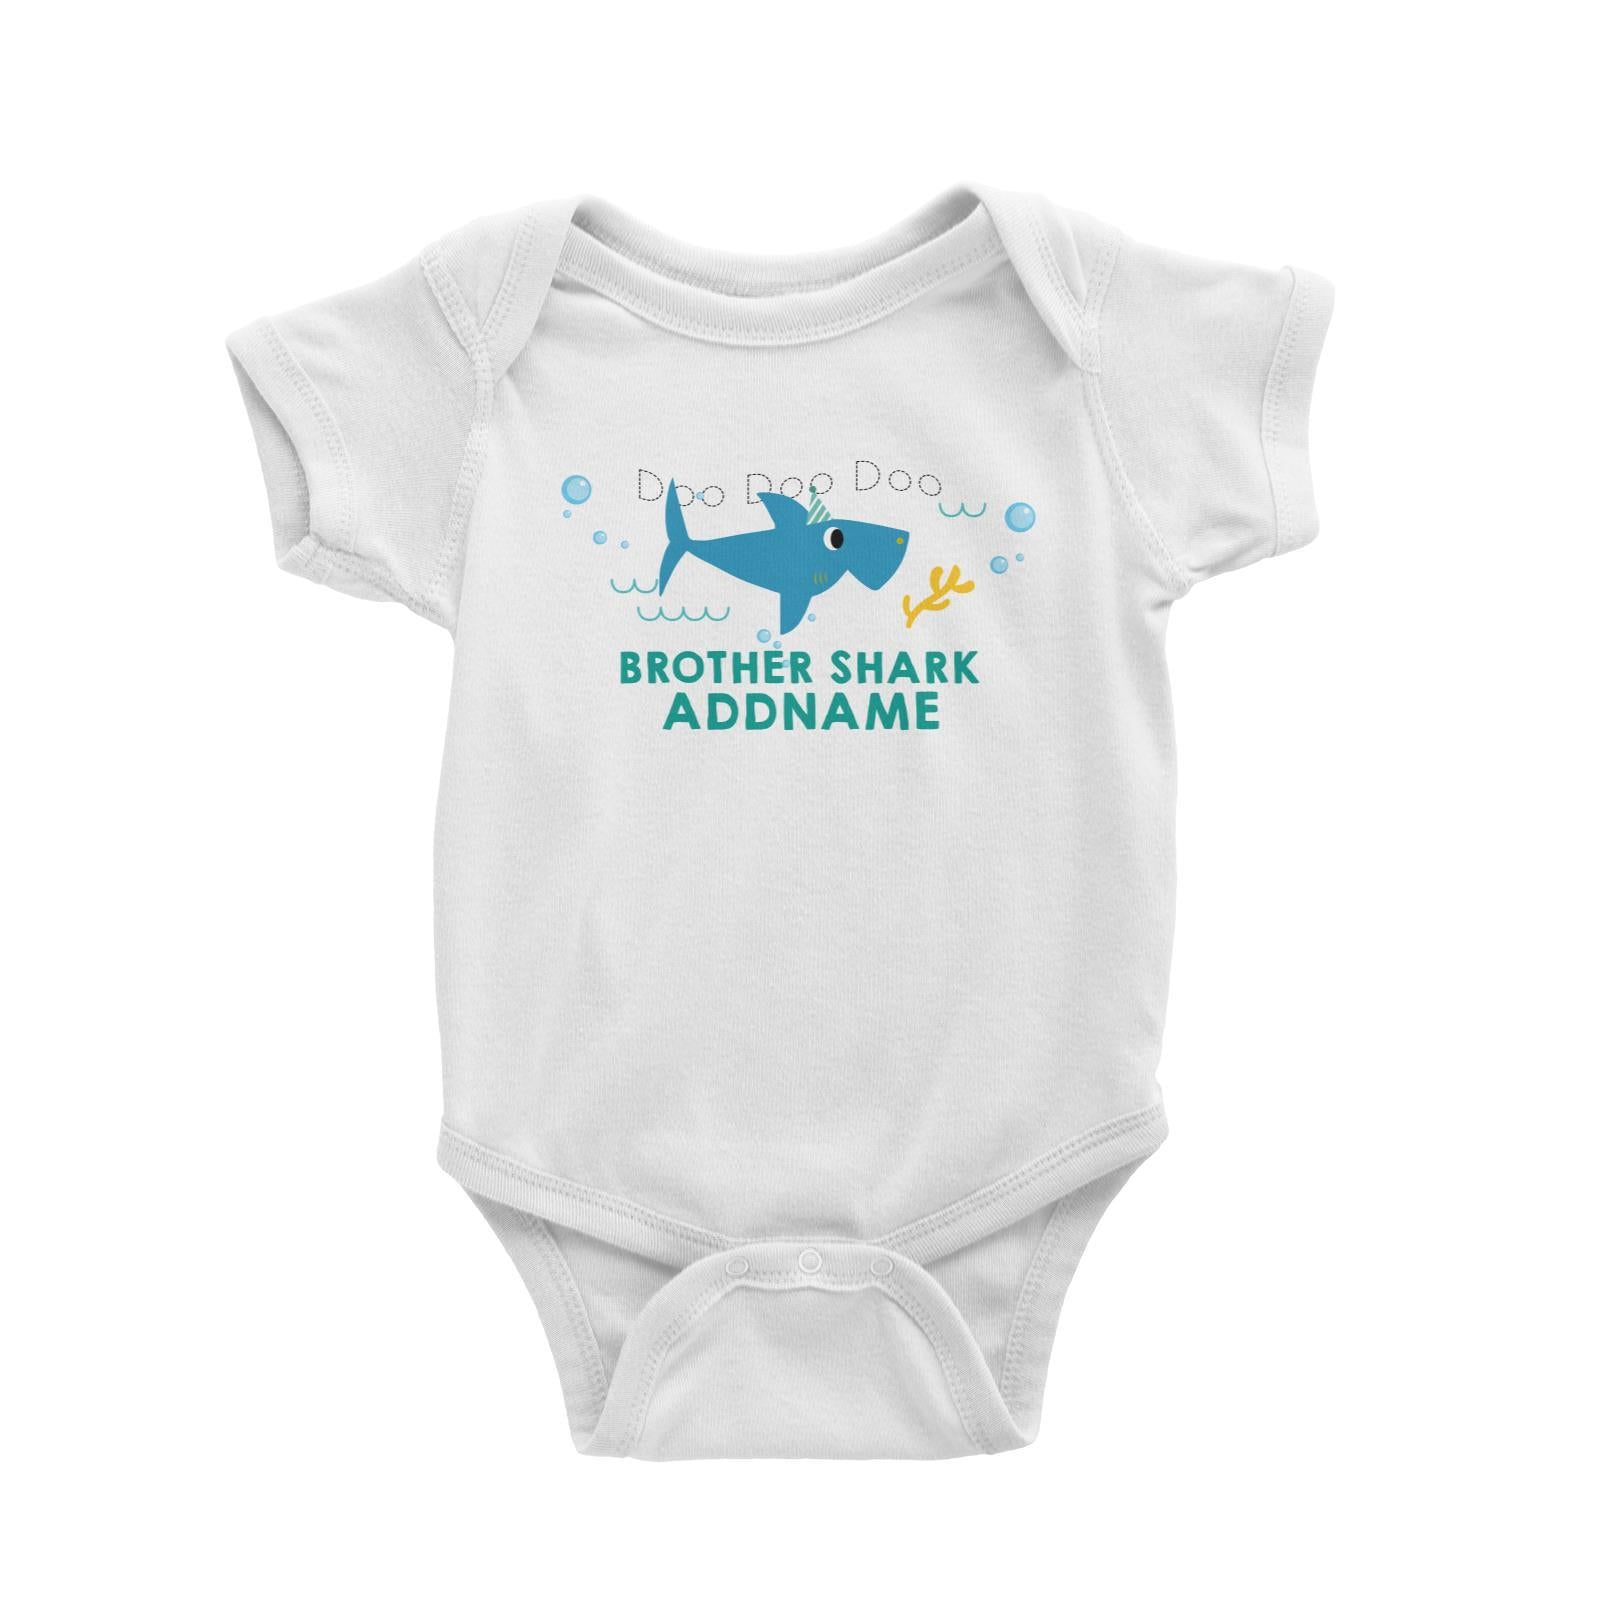 Brother Shark Birthday Theme Addname Baby Romper